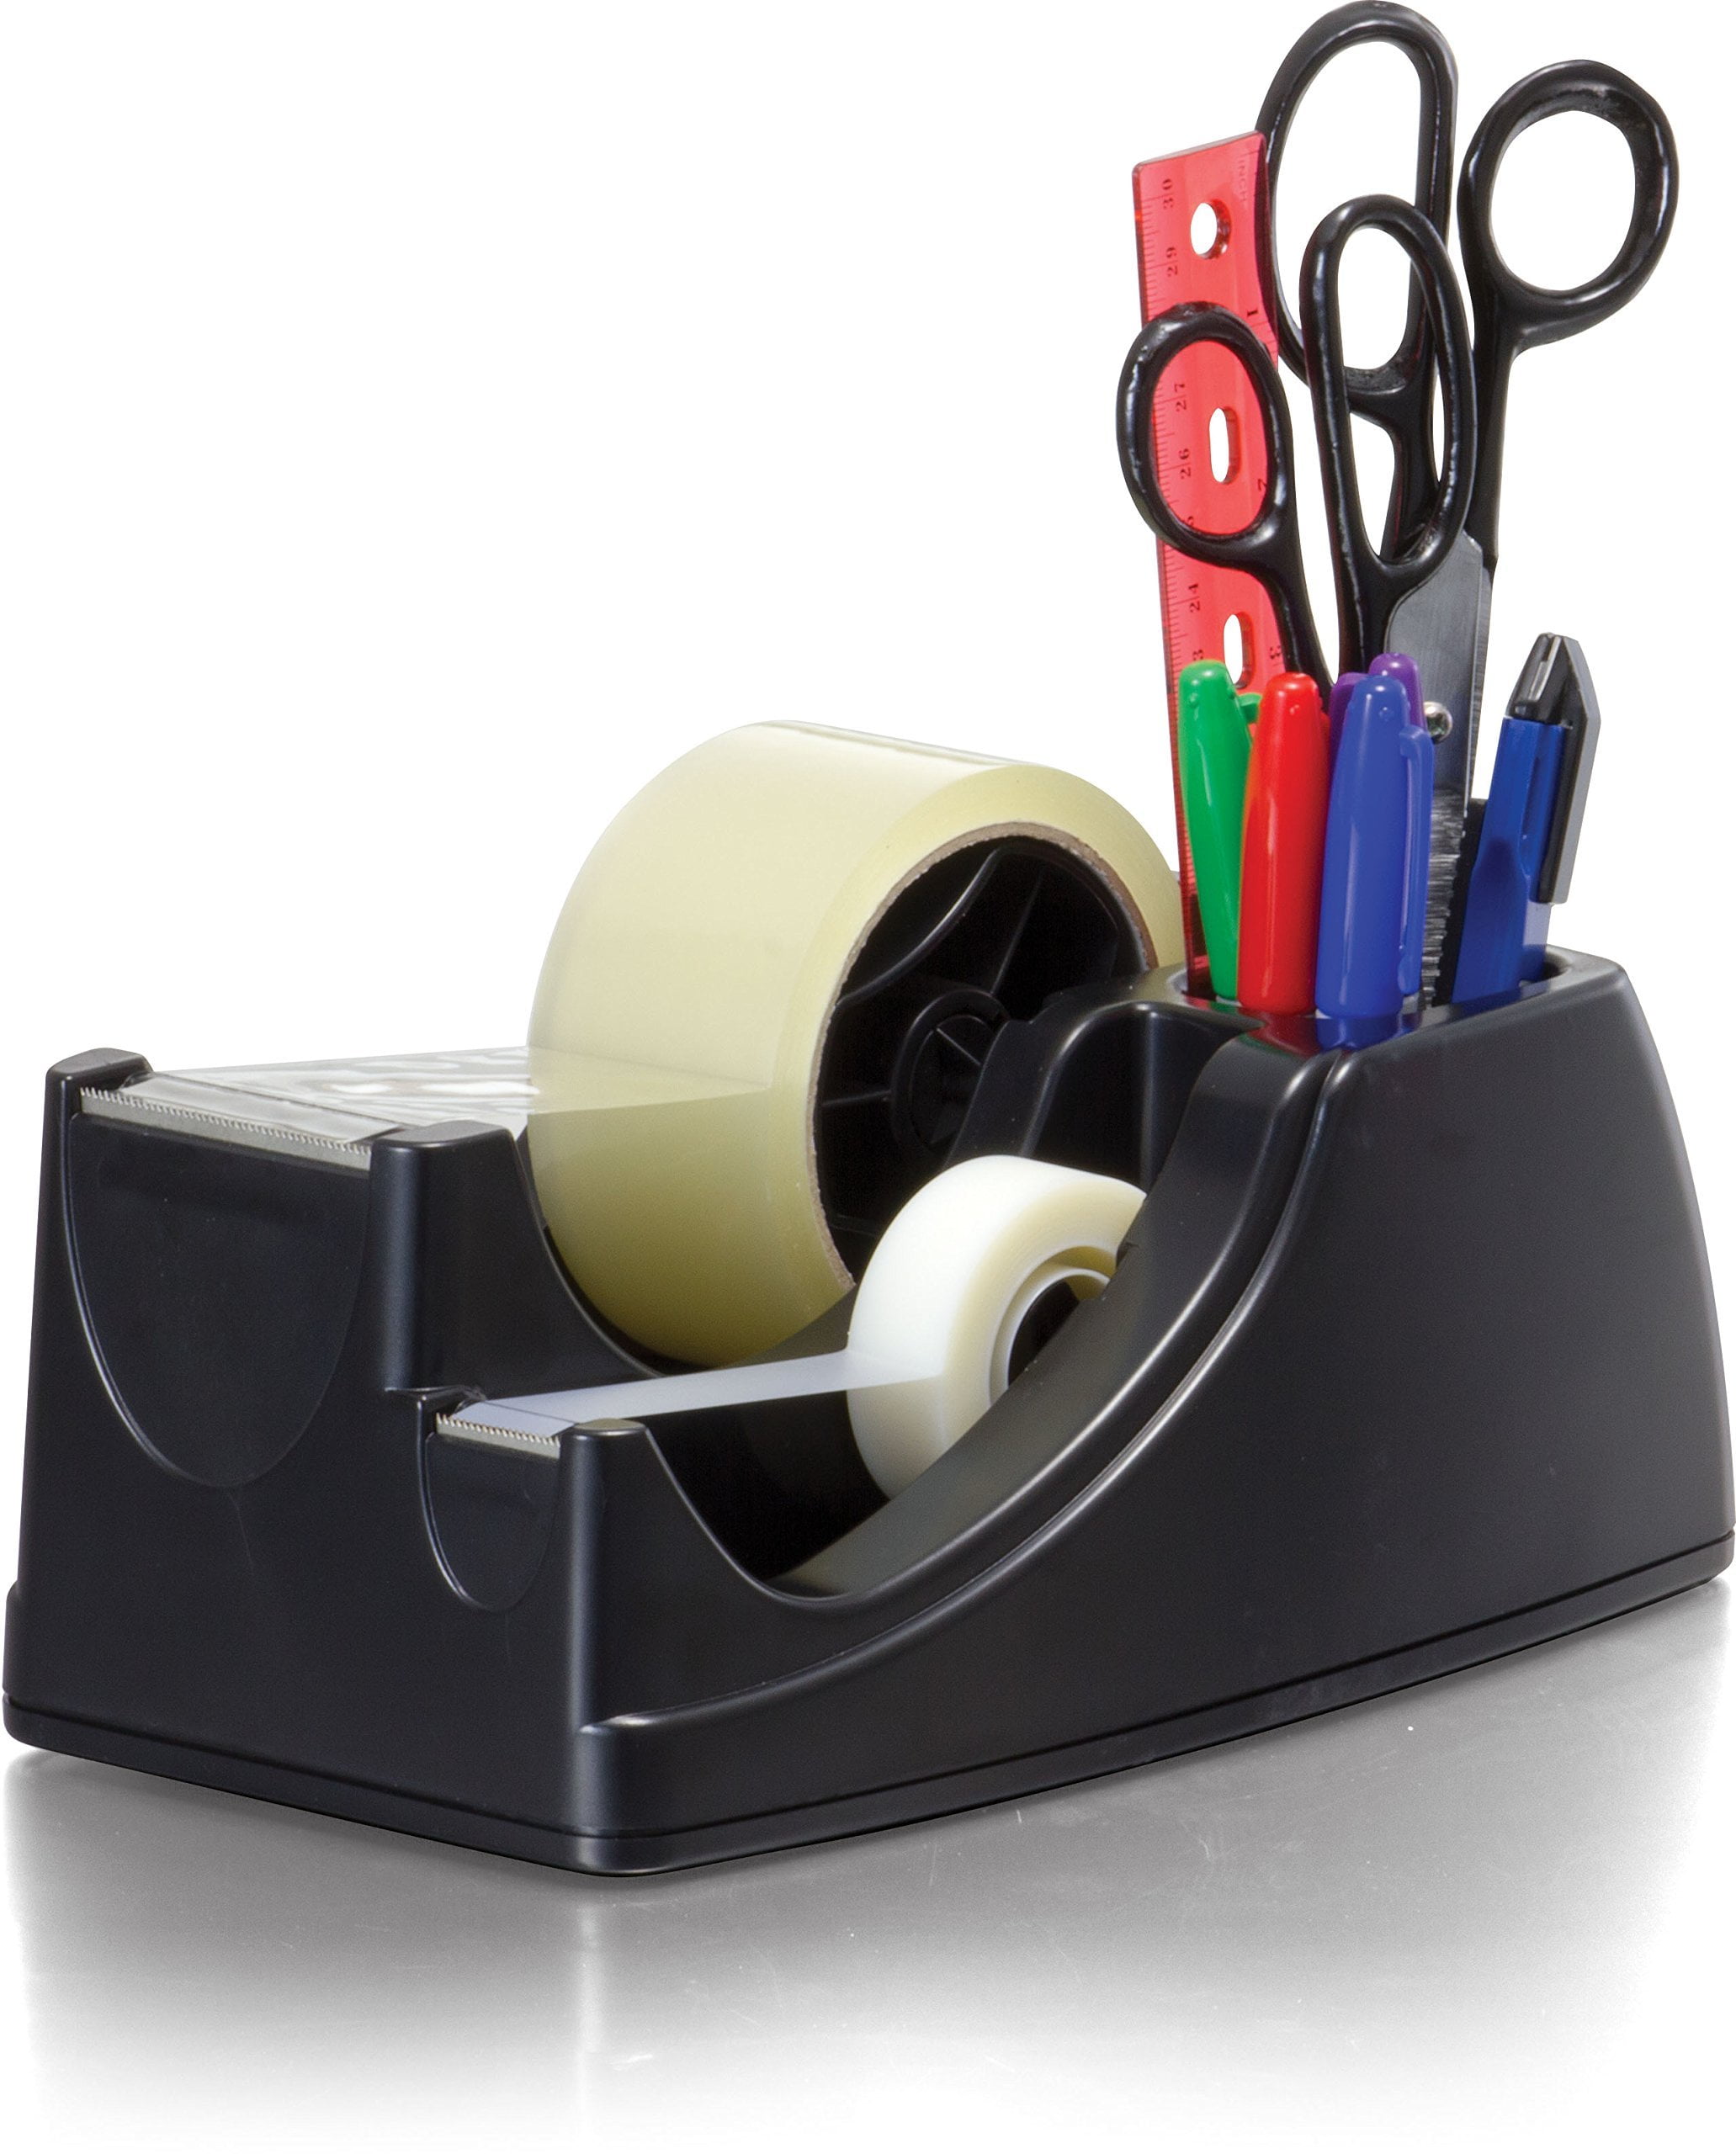 Research Products International Corp Heavy Duty Tape Dispenser